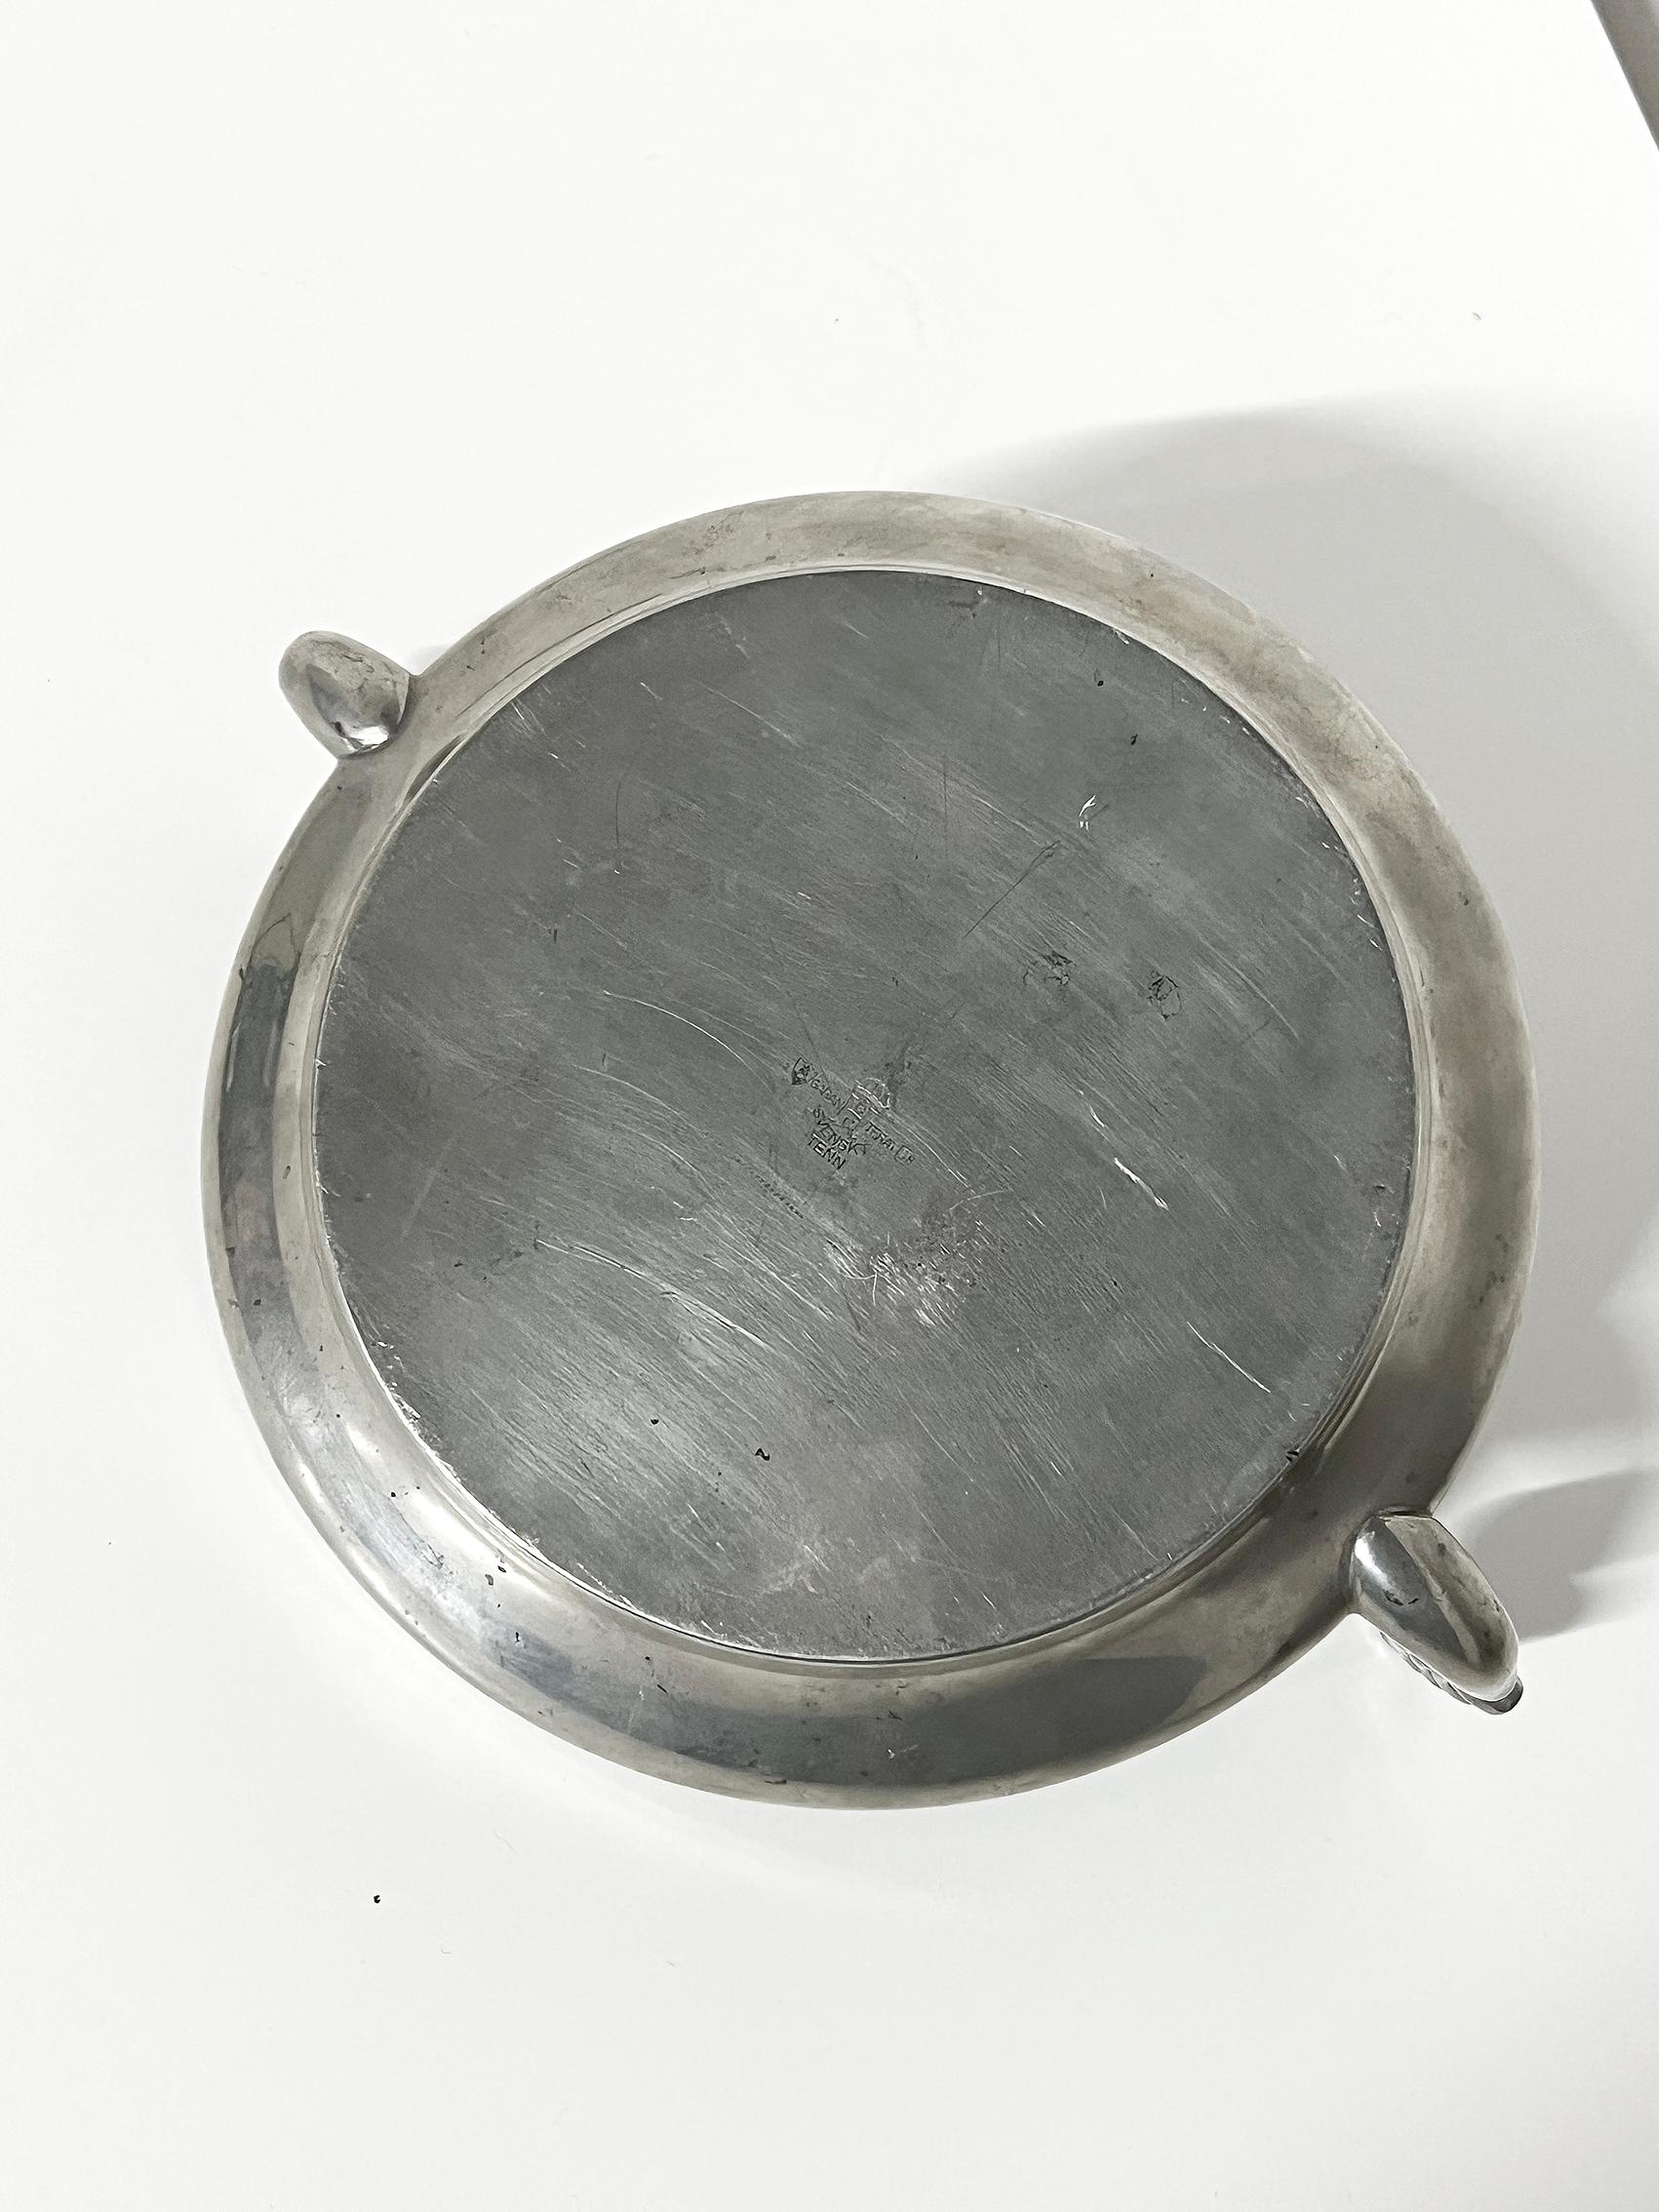 Swedish Modern Bowl in Pewter by CG Hallberg, 1930 In Fair Condition For Sale In Örebro, SE